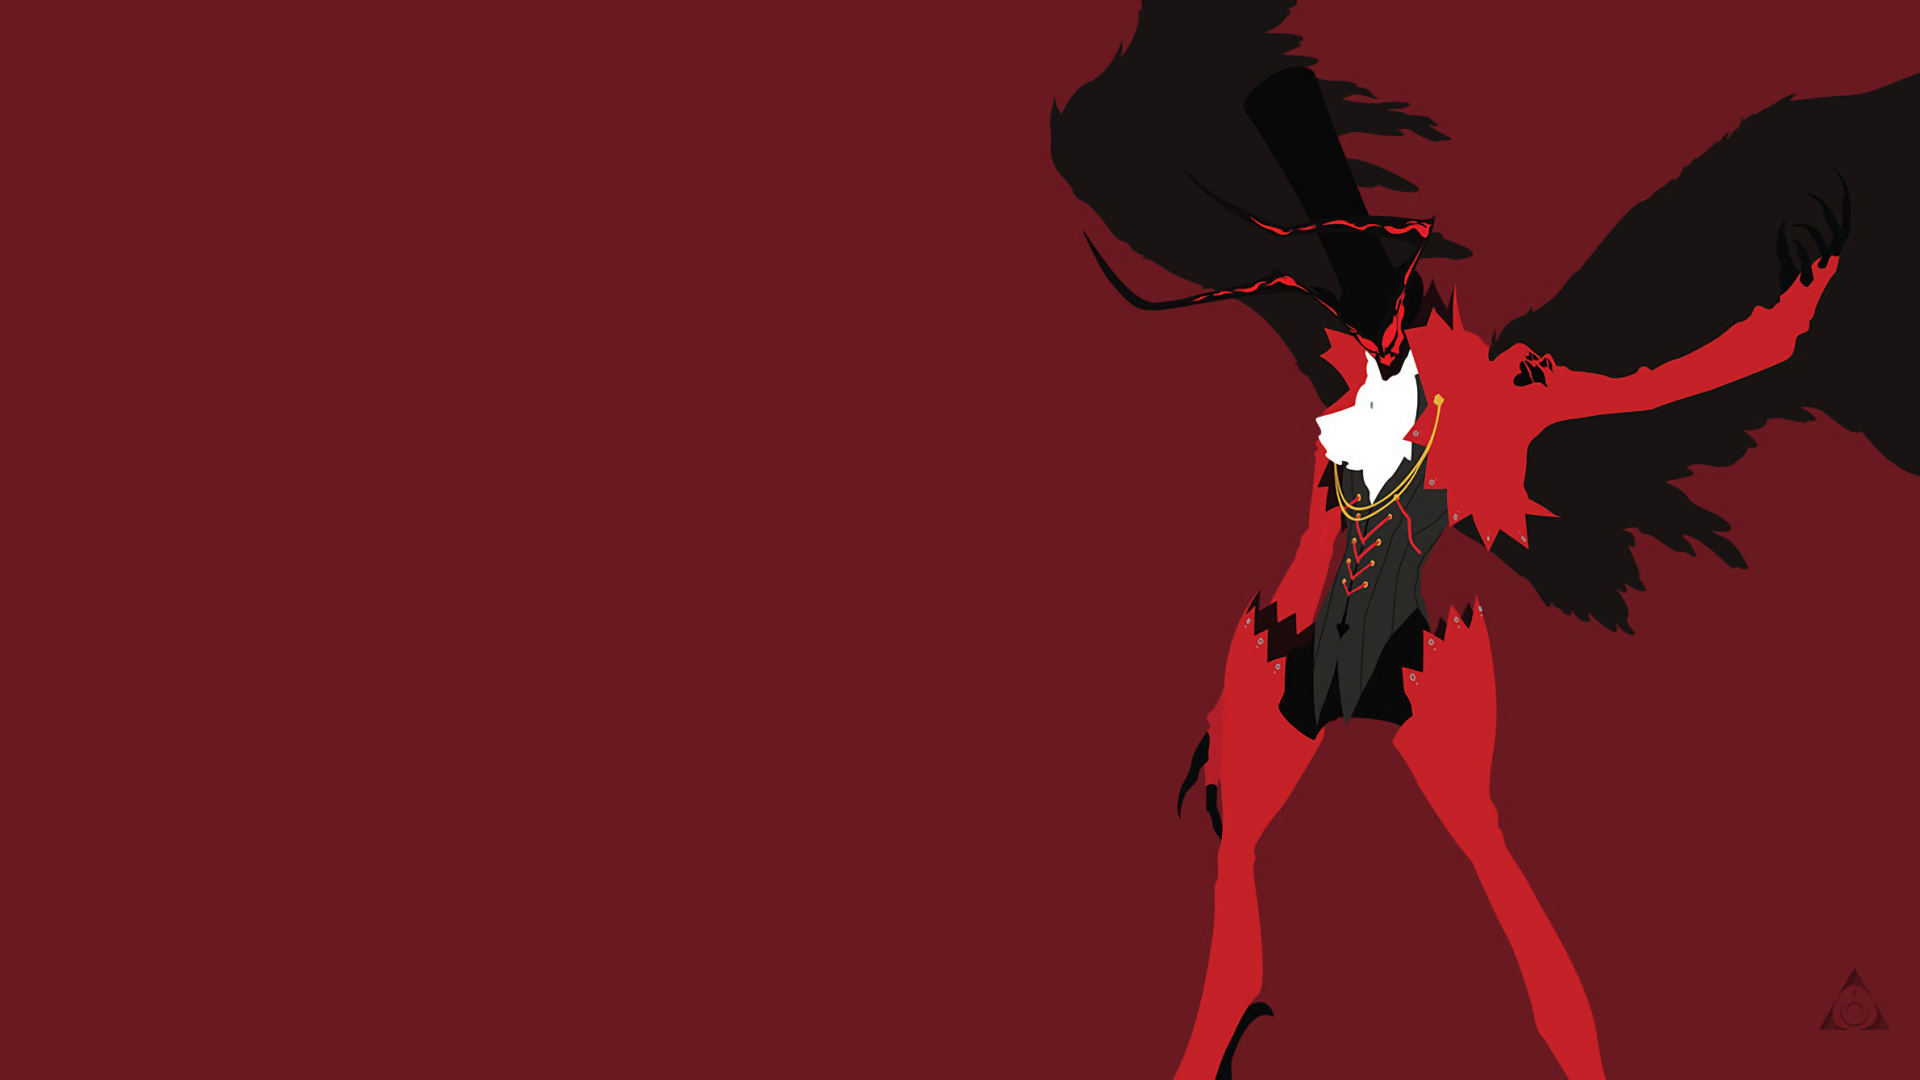 persona 5 iphone wallpaper,red,fictional character,graphic design,wing,illustration